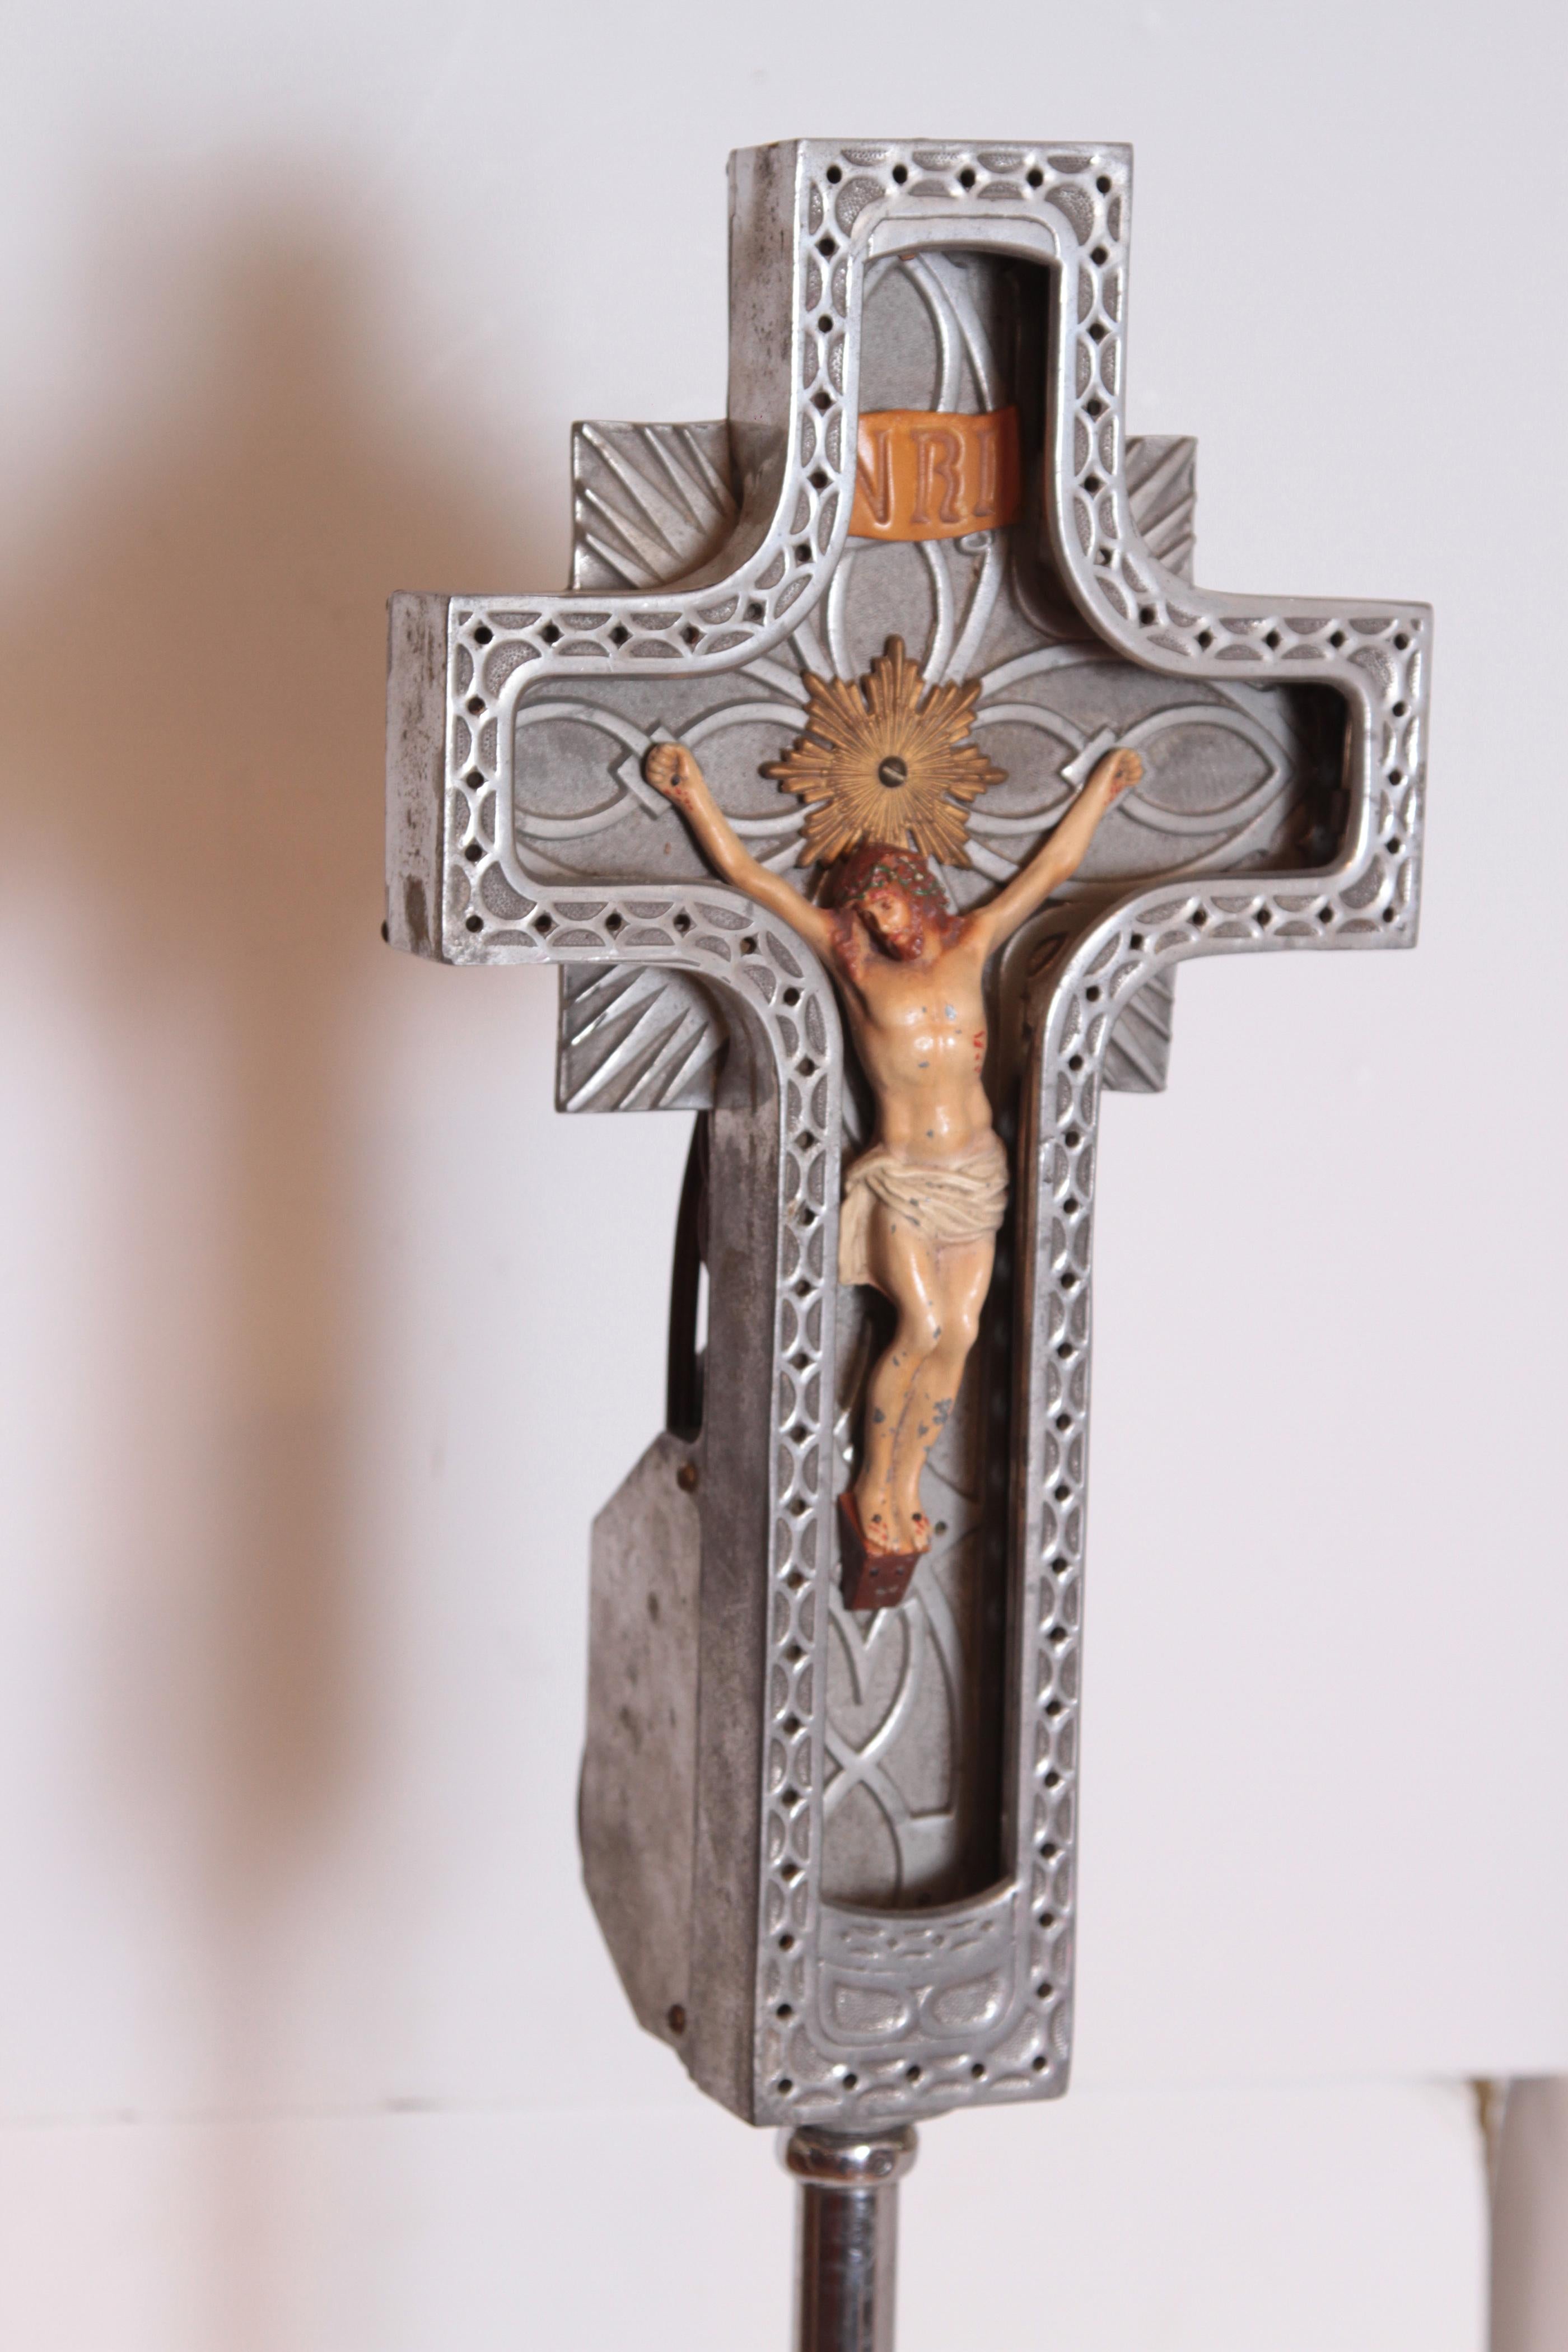 Mid-20th Century Art Deco Neon Crucifix, Cast Metal, Hand-Painted, with Stand in Case INRI